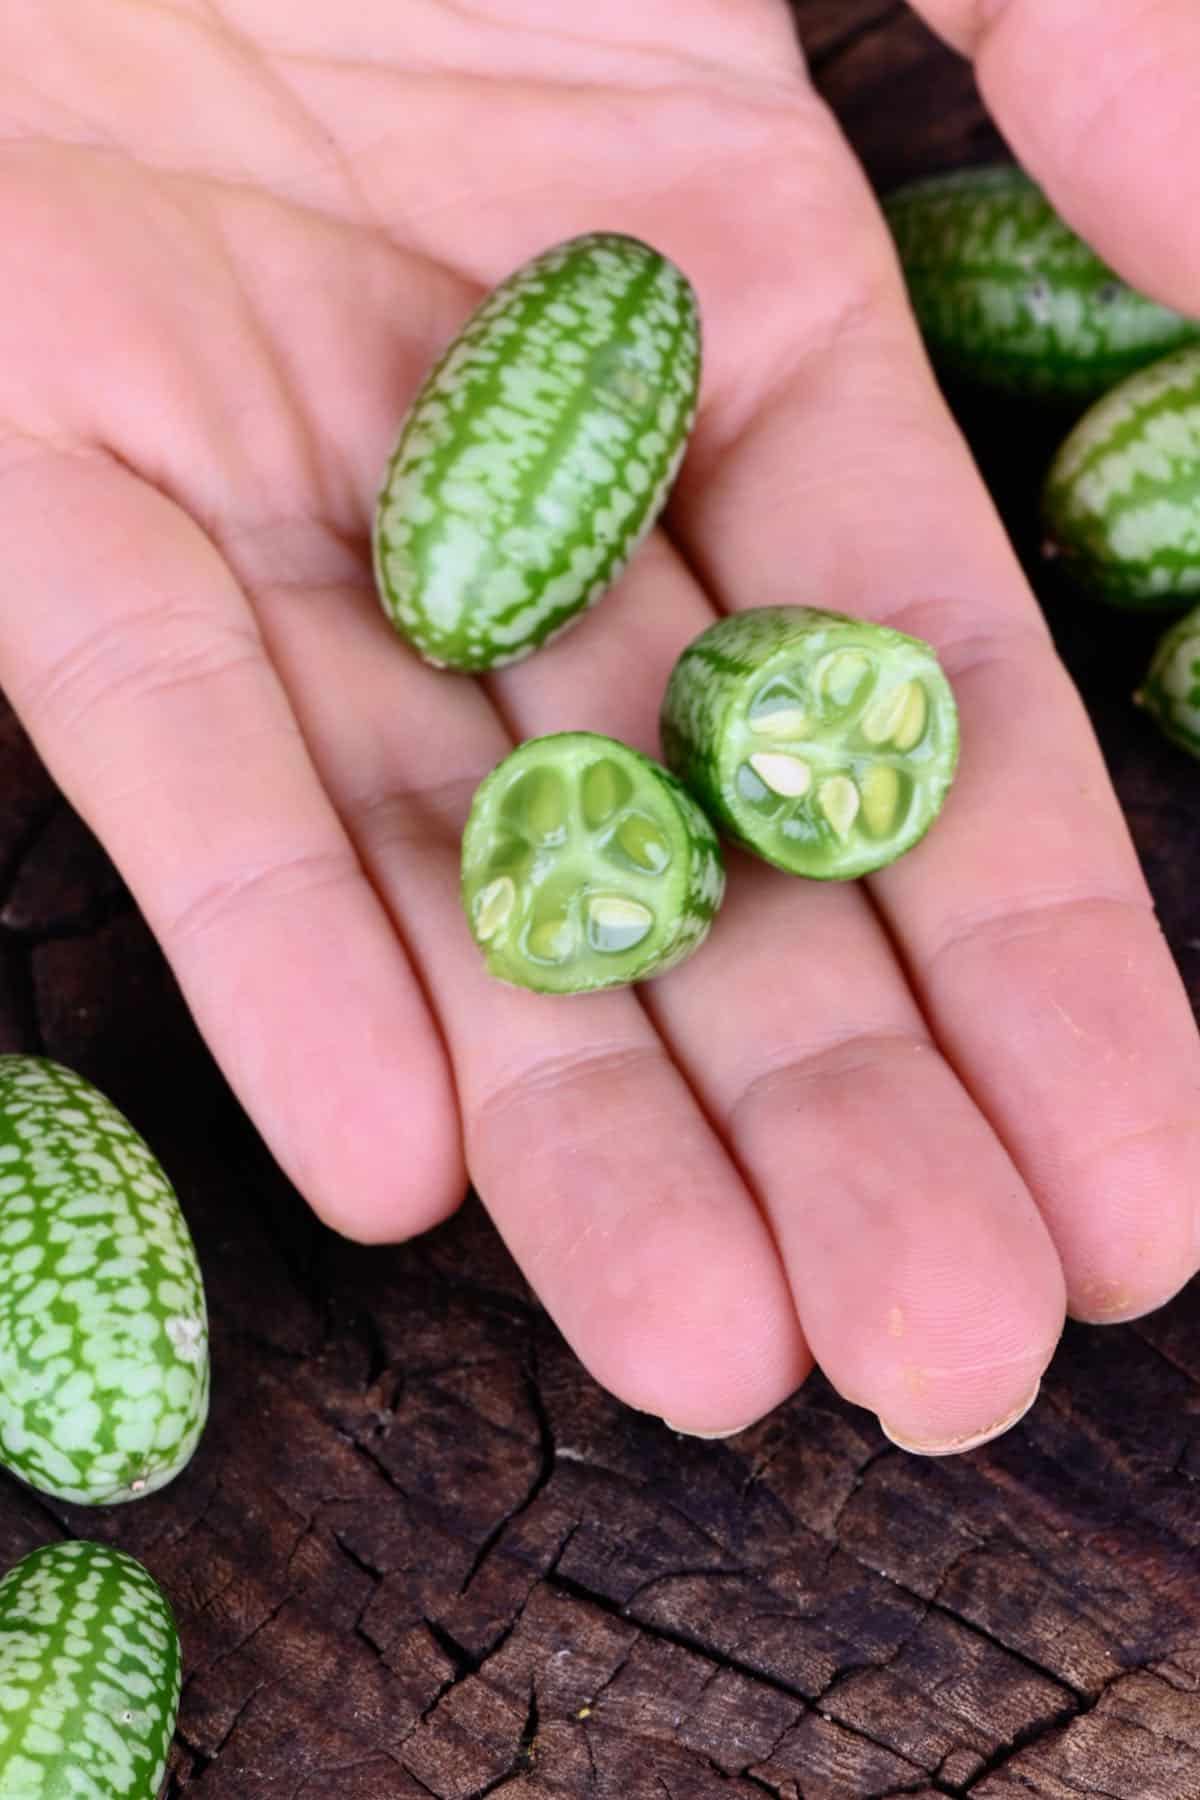 A Quick Guide To Cucamelon Berries - Alphafoodie